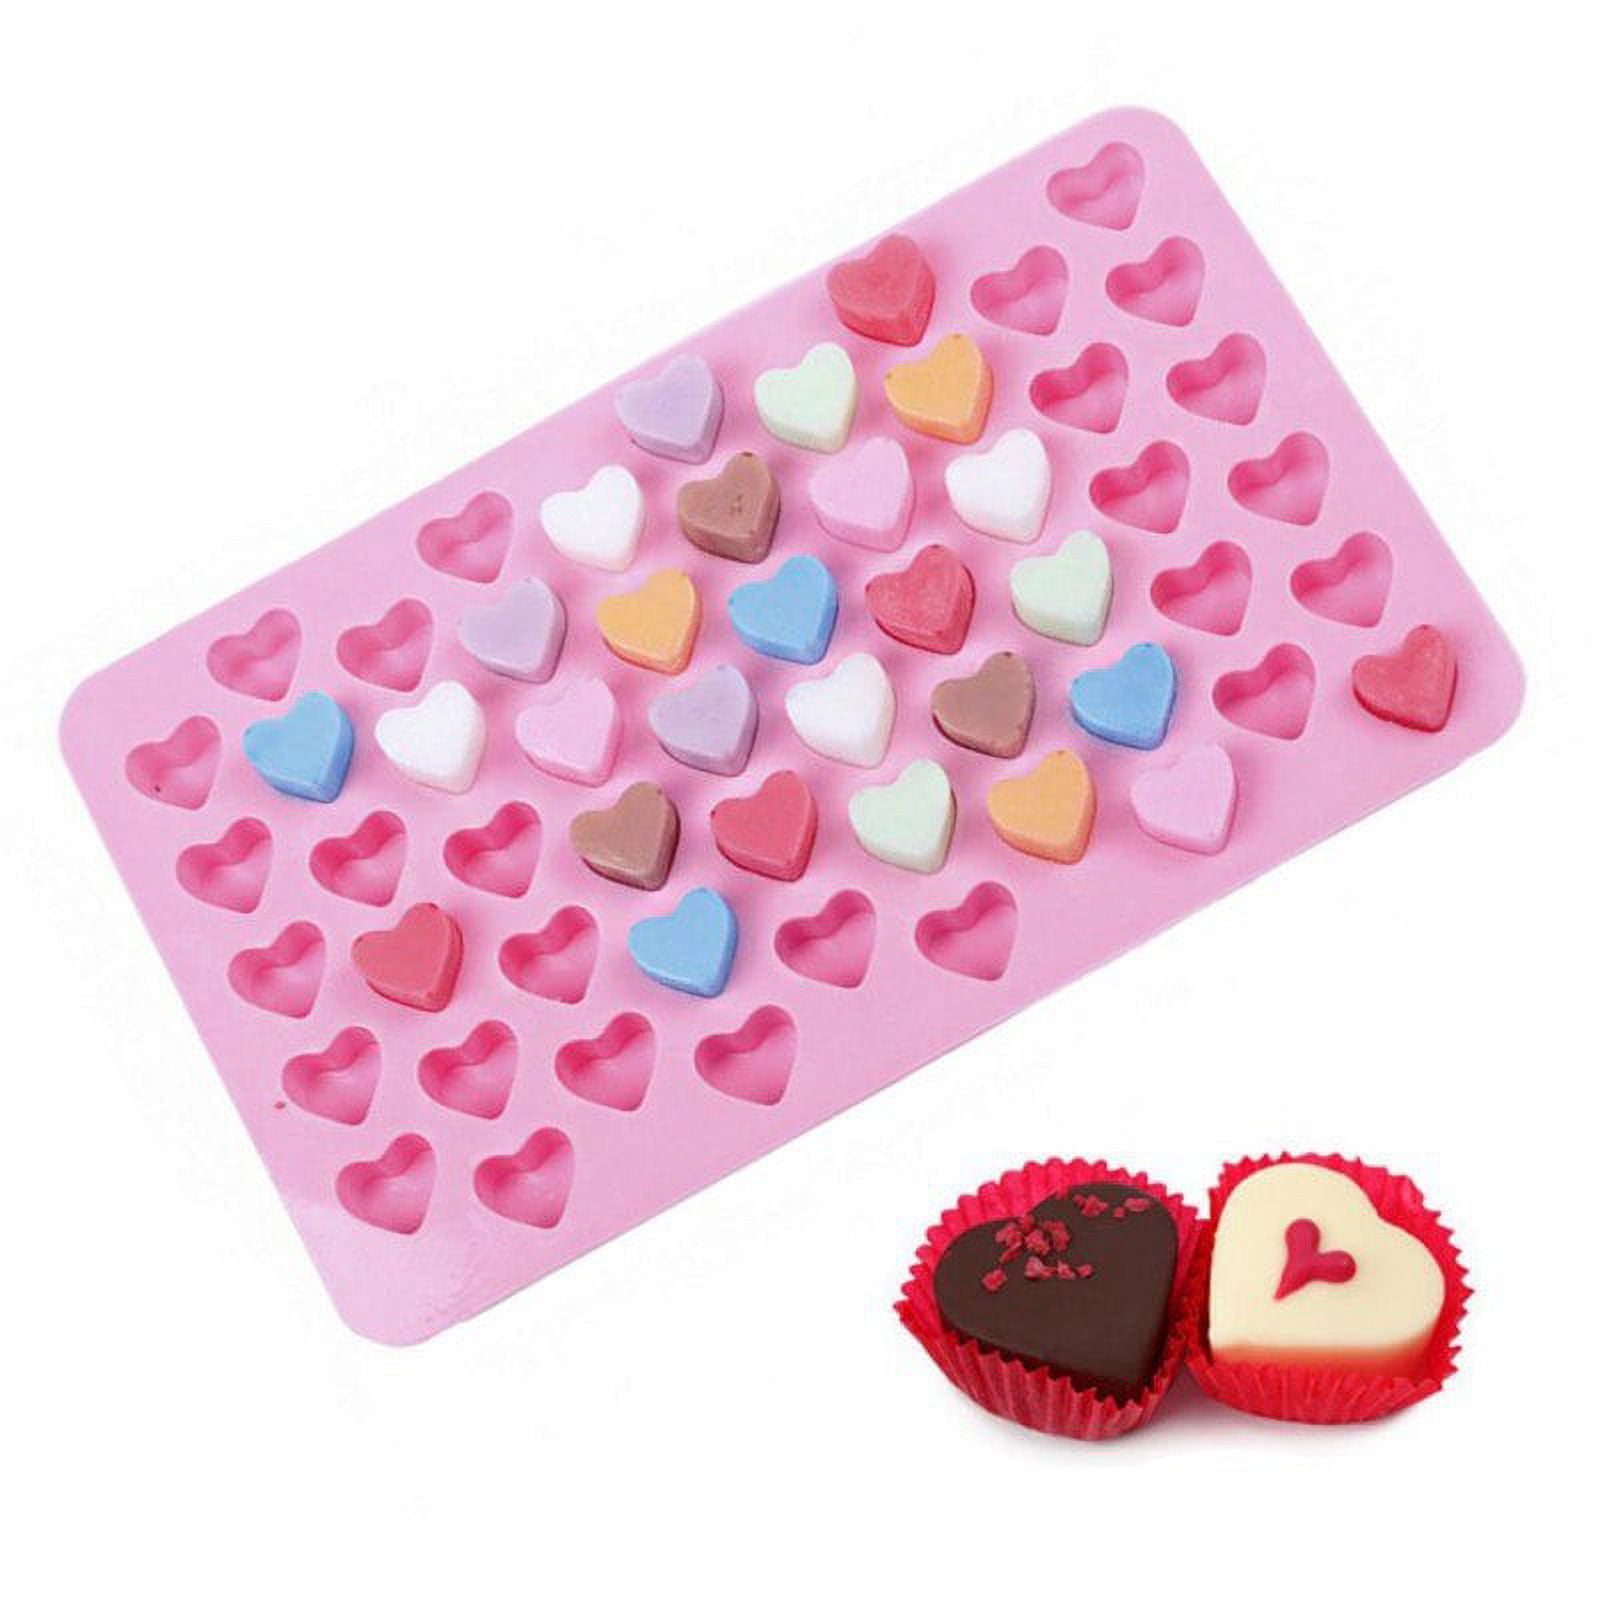 BusyPet Geometric Heart Silicone Mold (3 Pcs) Heart Molds Silicone Shapes Mini Heart Silicone Mold Heart Ice Cube Tray Heart Chocolate Molds Silicone